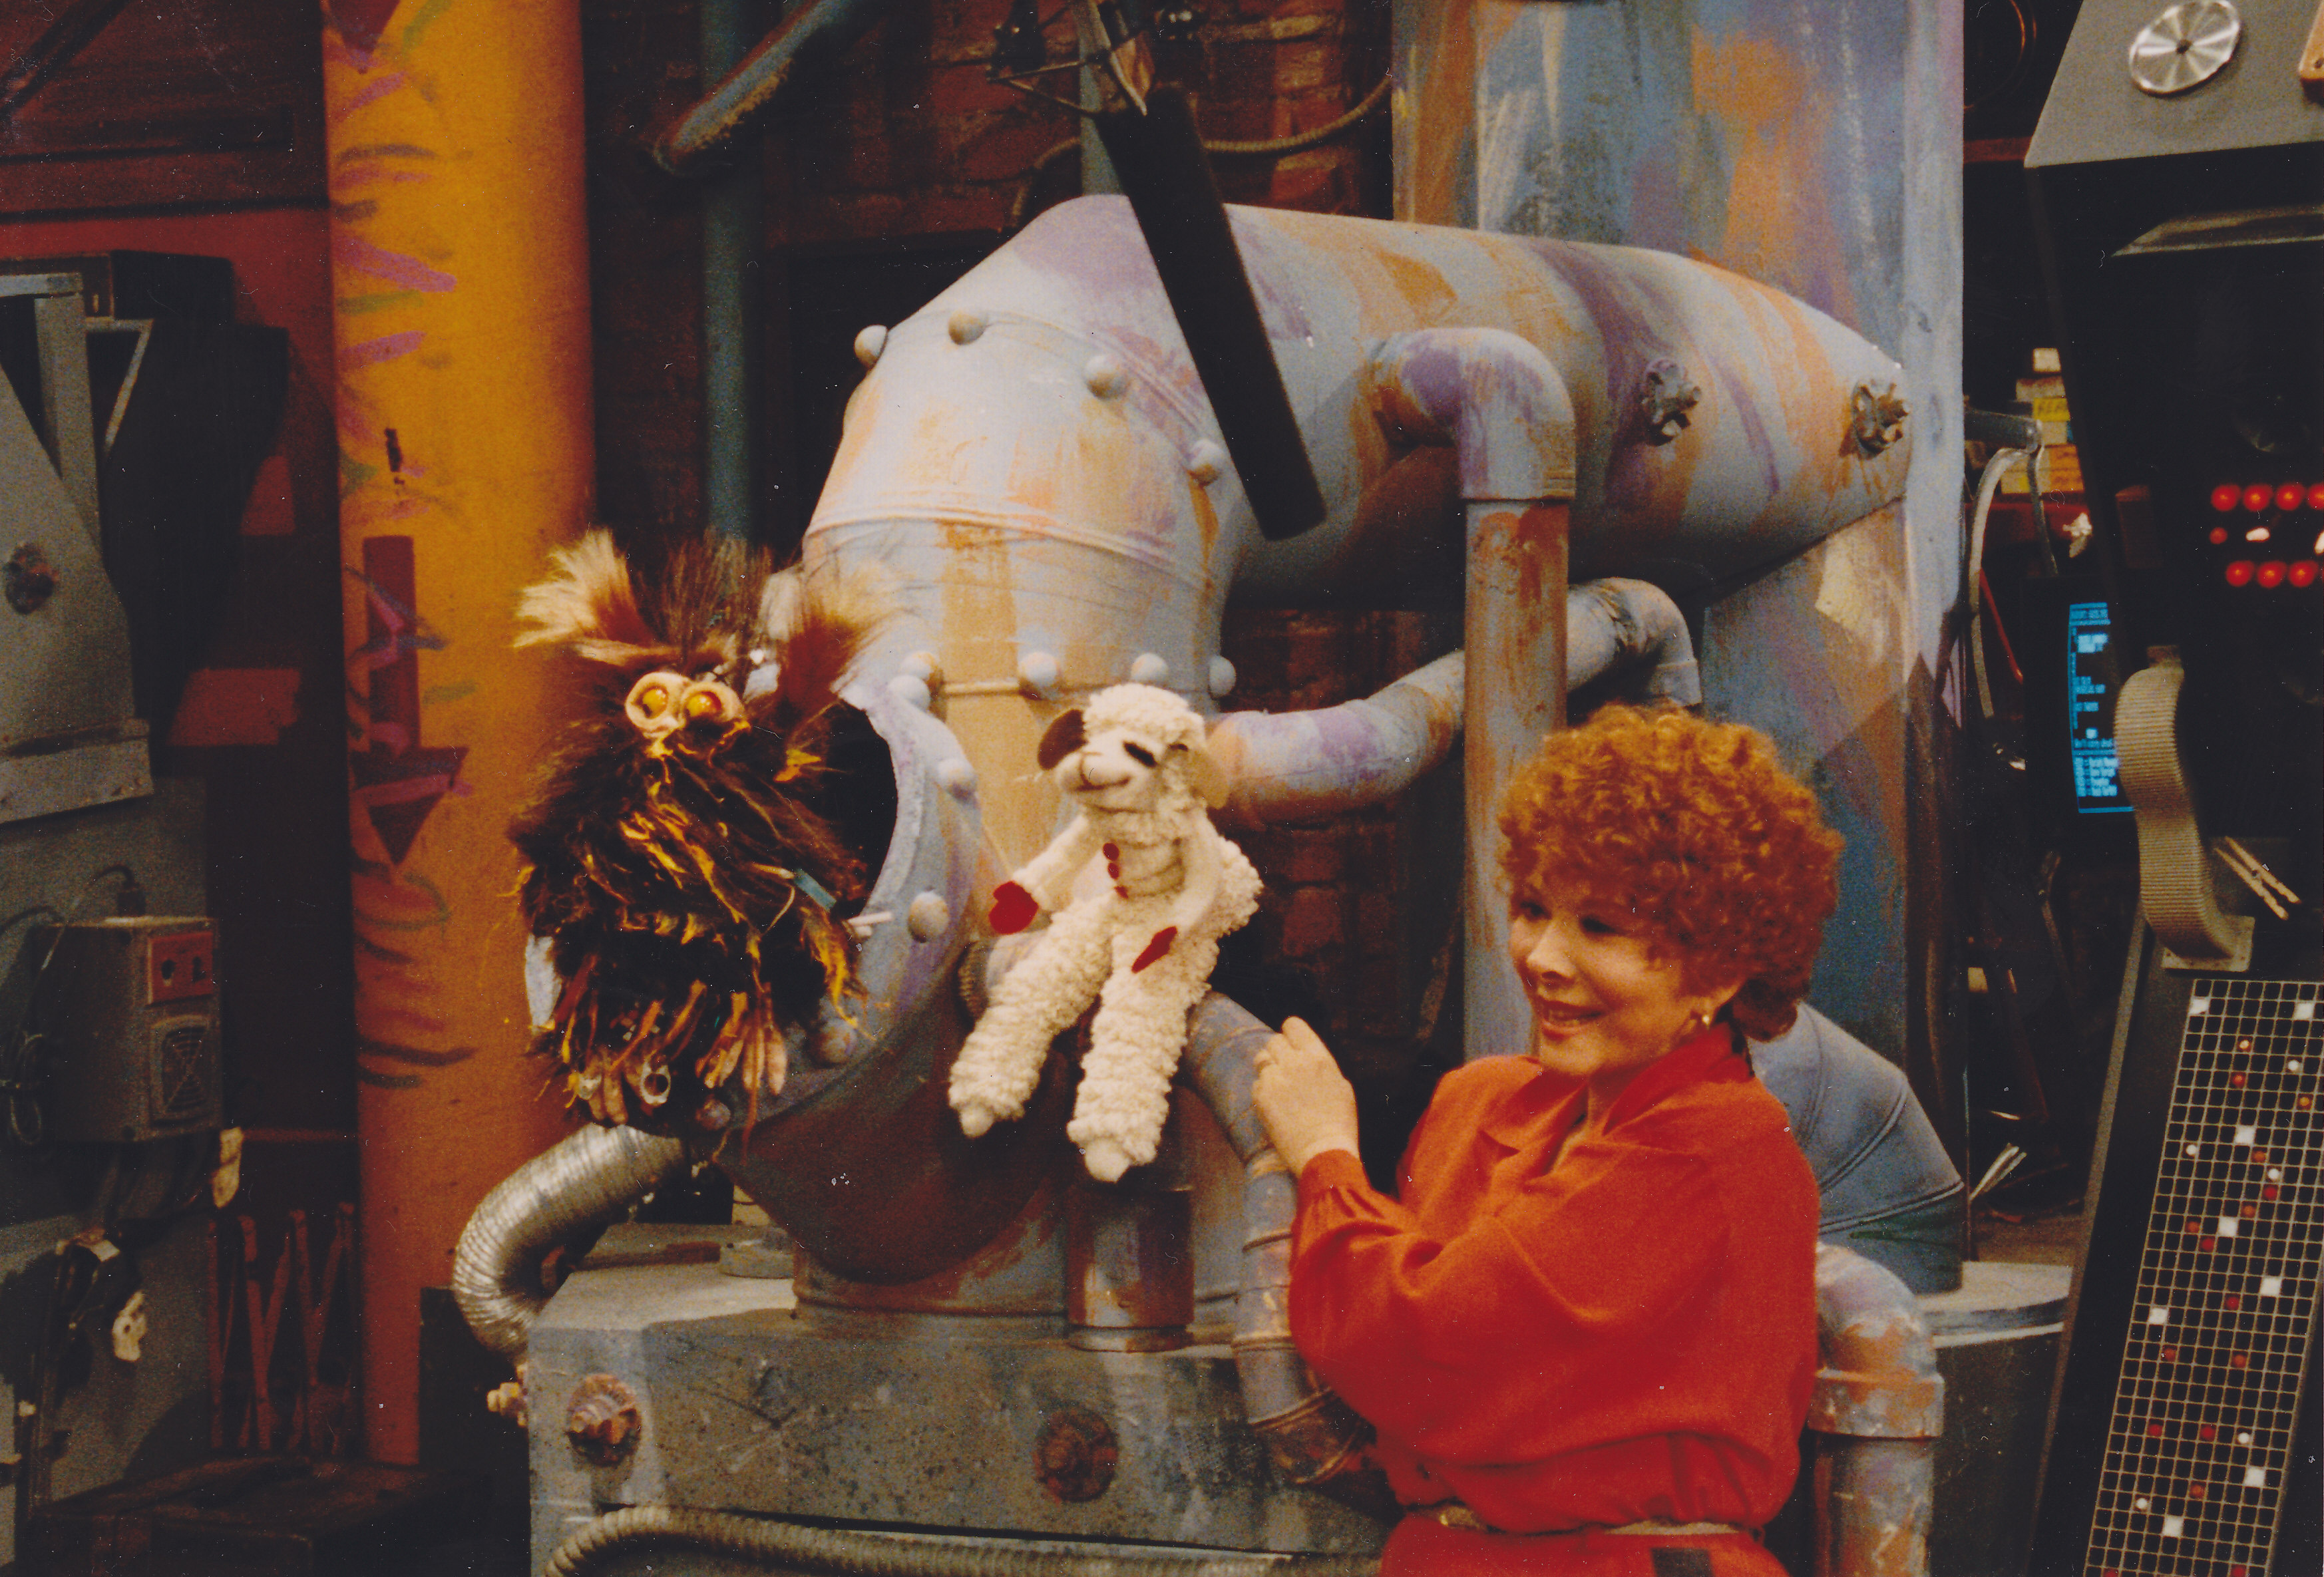 Wake, Rattle & Roll (1990). Hanna-Barbera. 'Skuzz' (Me) and 'Lamb Chops' (Shari Lewis). I performed in all 131 shows (including pilot) as lead puppeteer on 'D.E.C.K.S.' and 'Skuzz'.